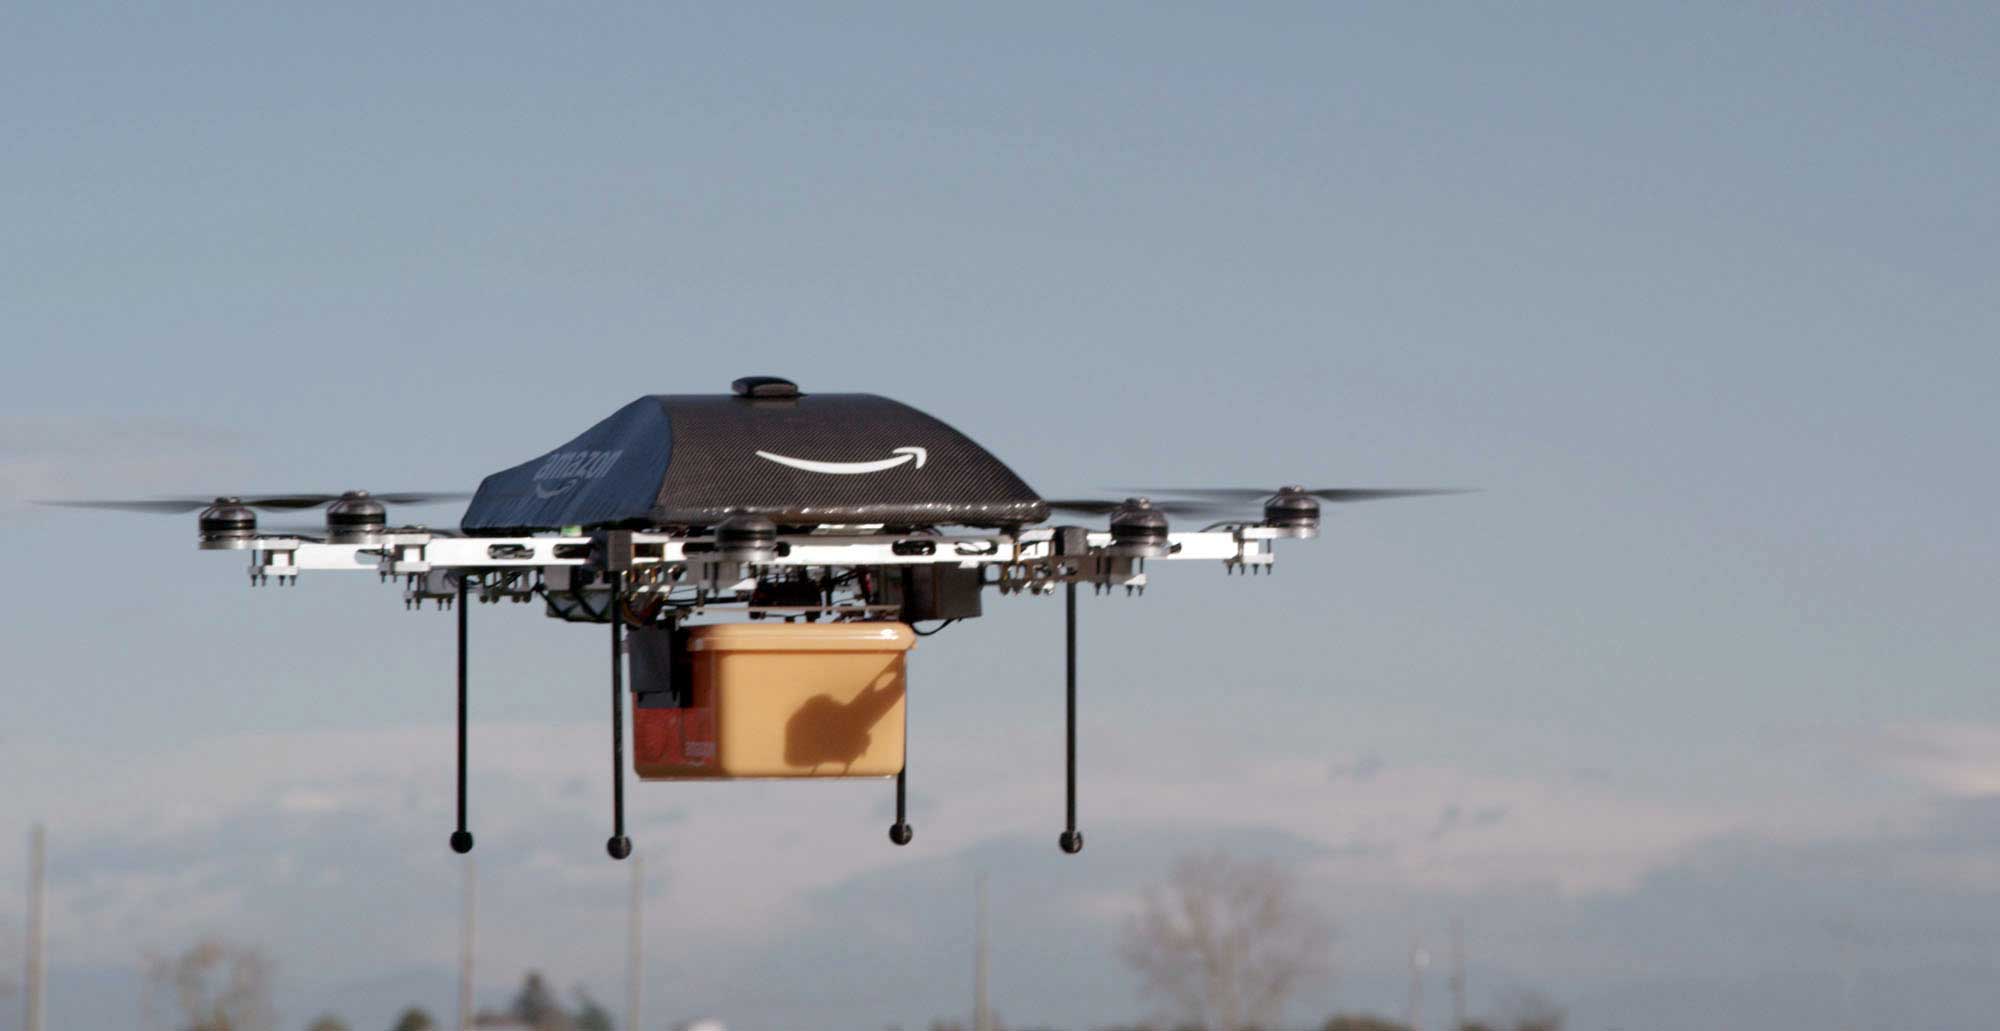 Amazon's 'Prime Air' unmanned aircraft project prototype. (Amazon/AP)